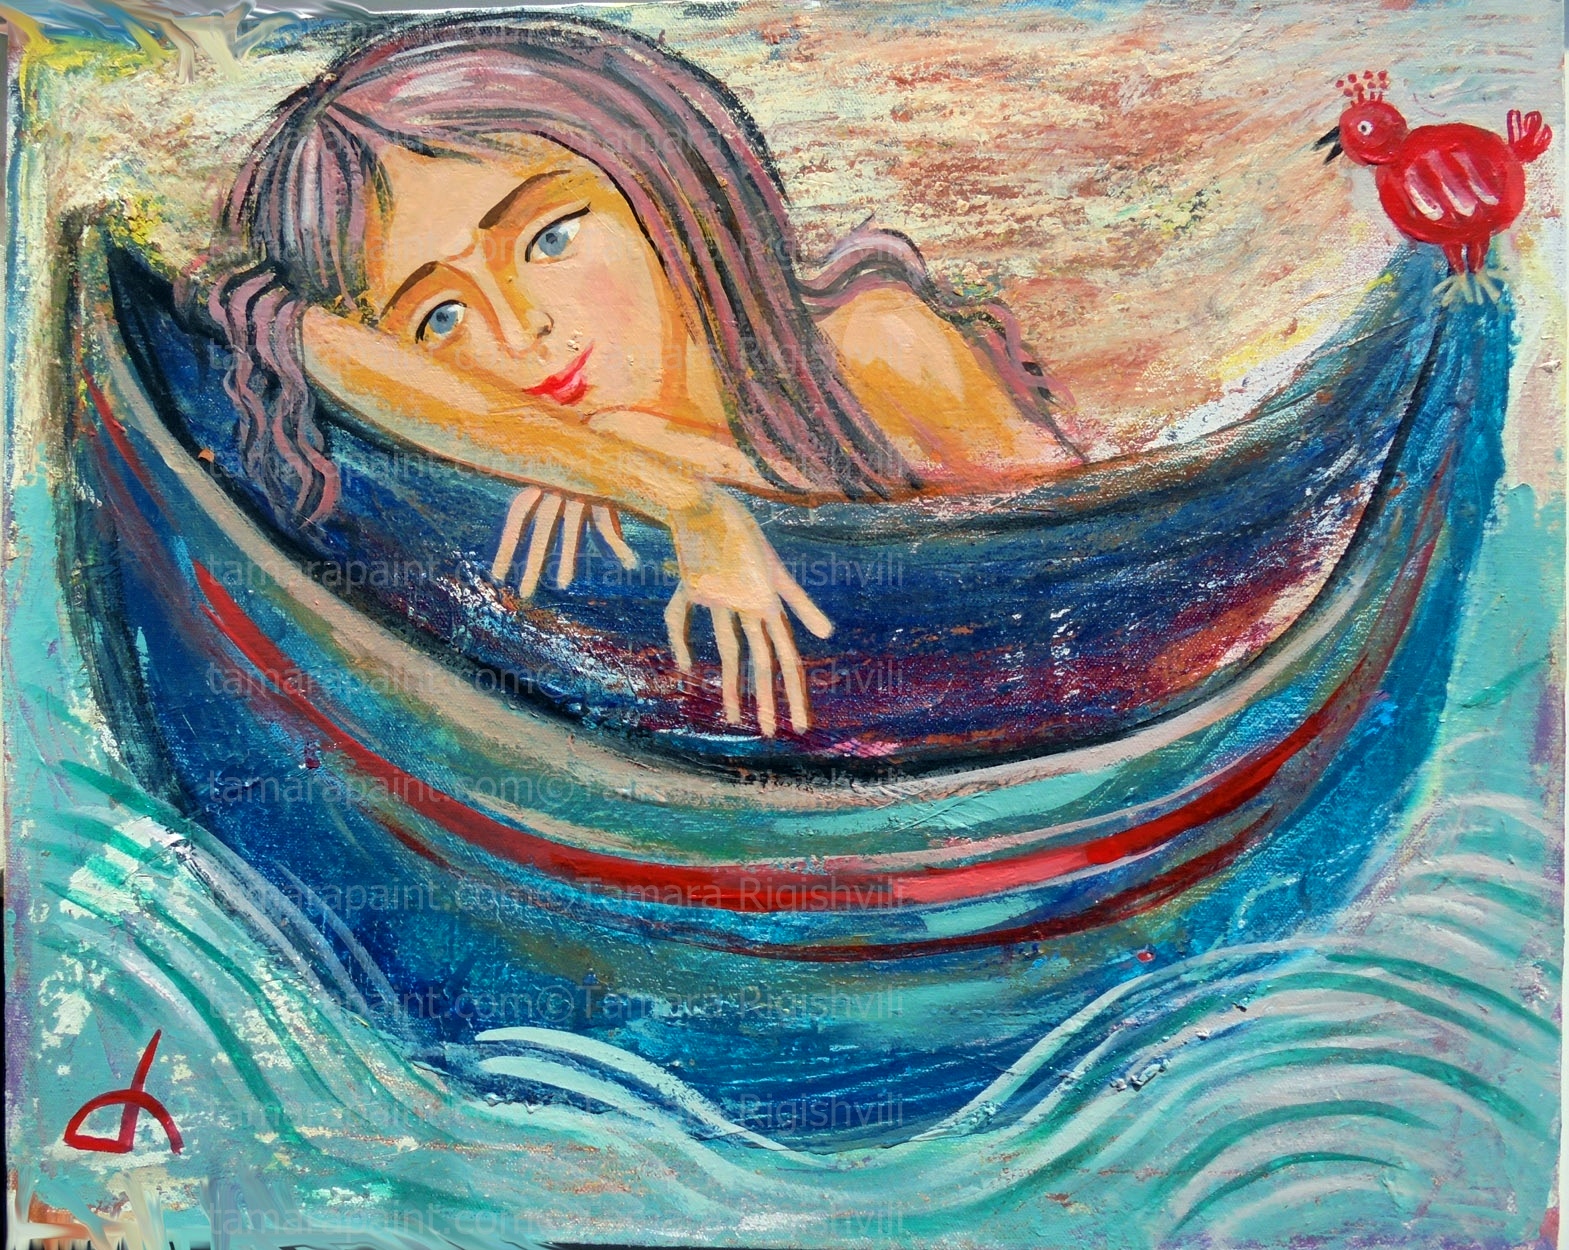 Sailor Girl is drifting in her dreams, she has lot of adventures and little red bird is alwayes with her,  Artwork  by artist Tamara Rigishvili 